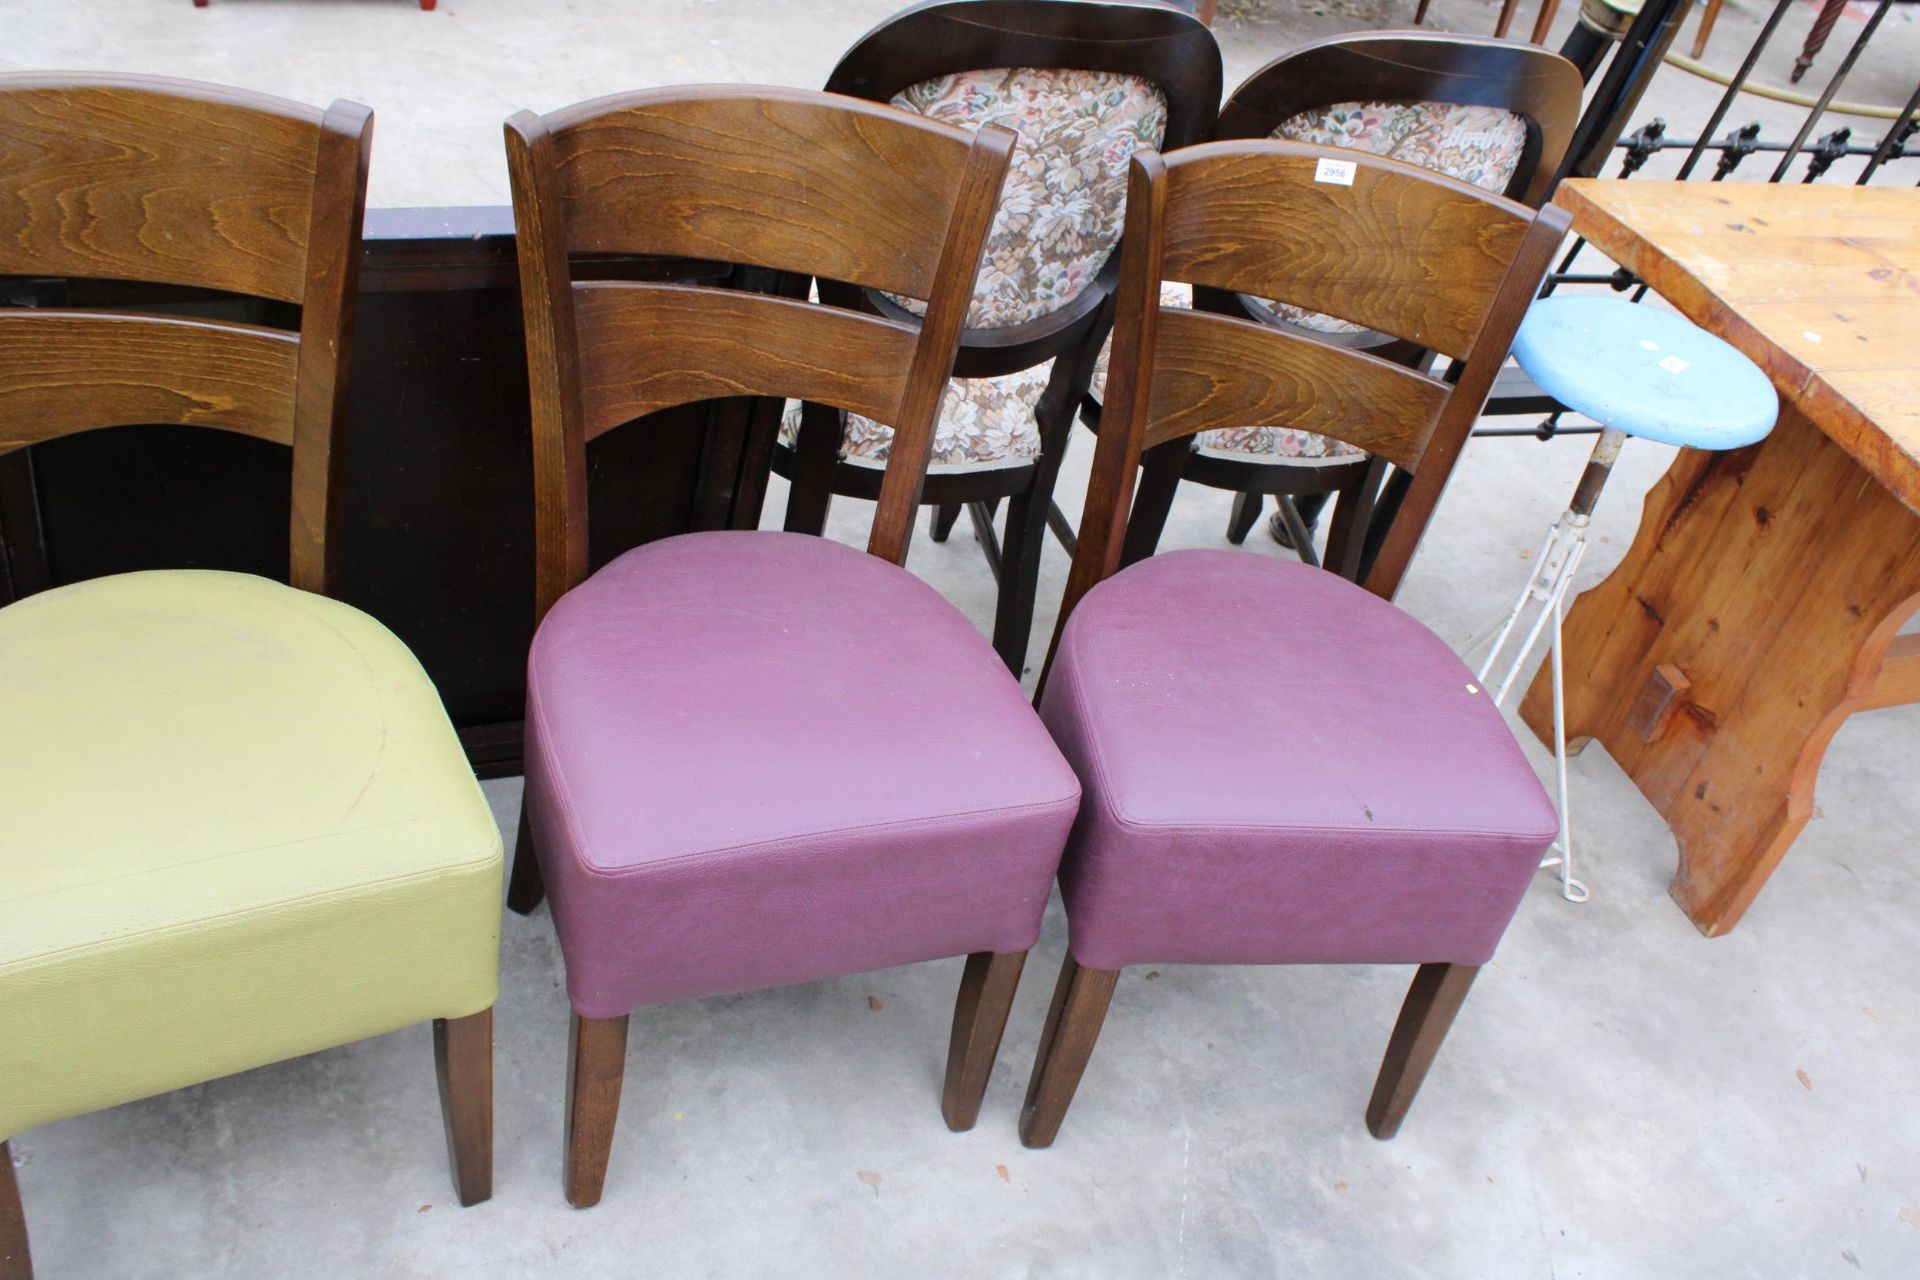 A SET OF FIVE MODERN GEOMETRIC FURNITURE DINING CHAIRS WITH FAUX LEATHER STRAP - Image 2 of 3